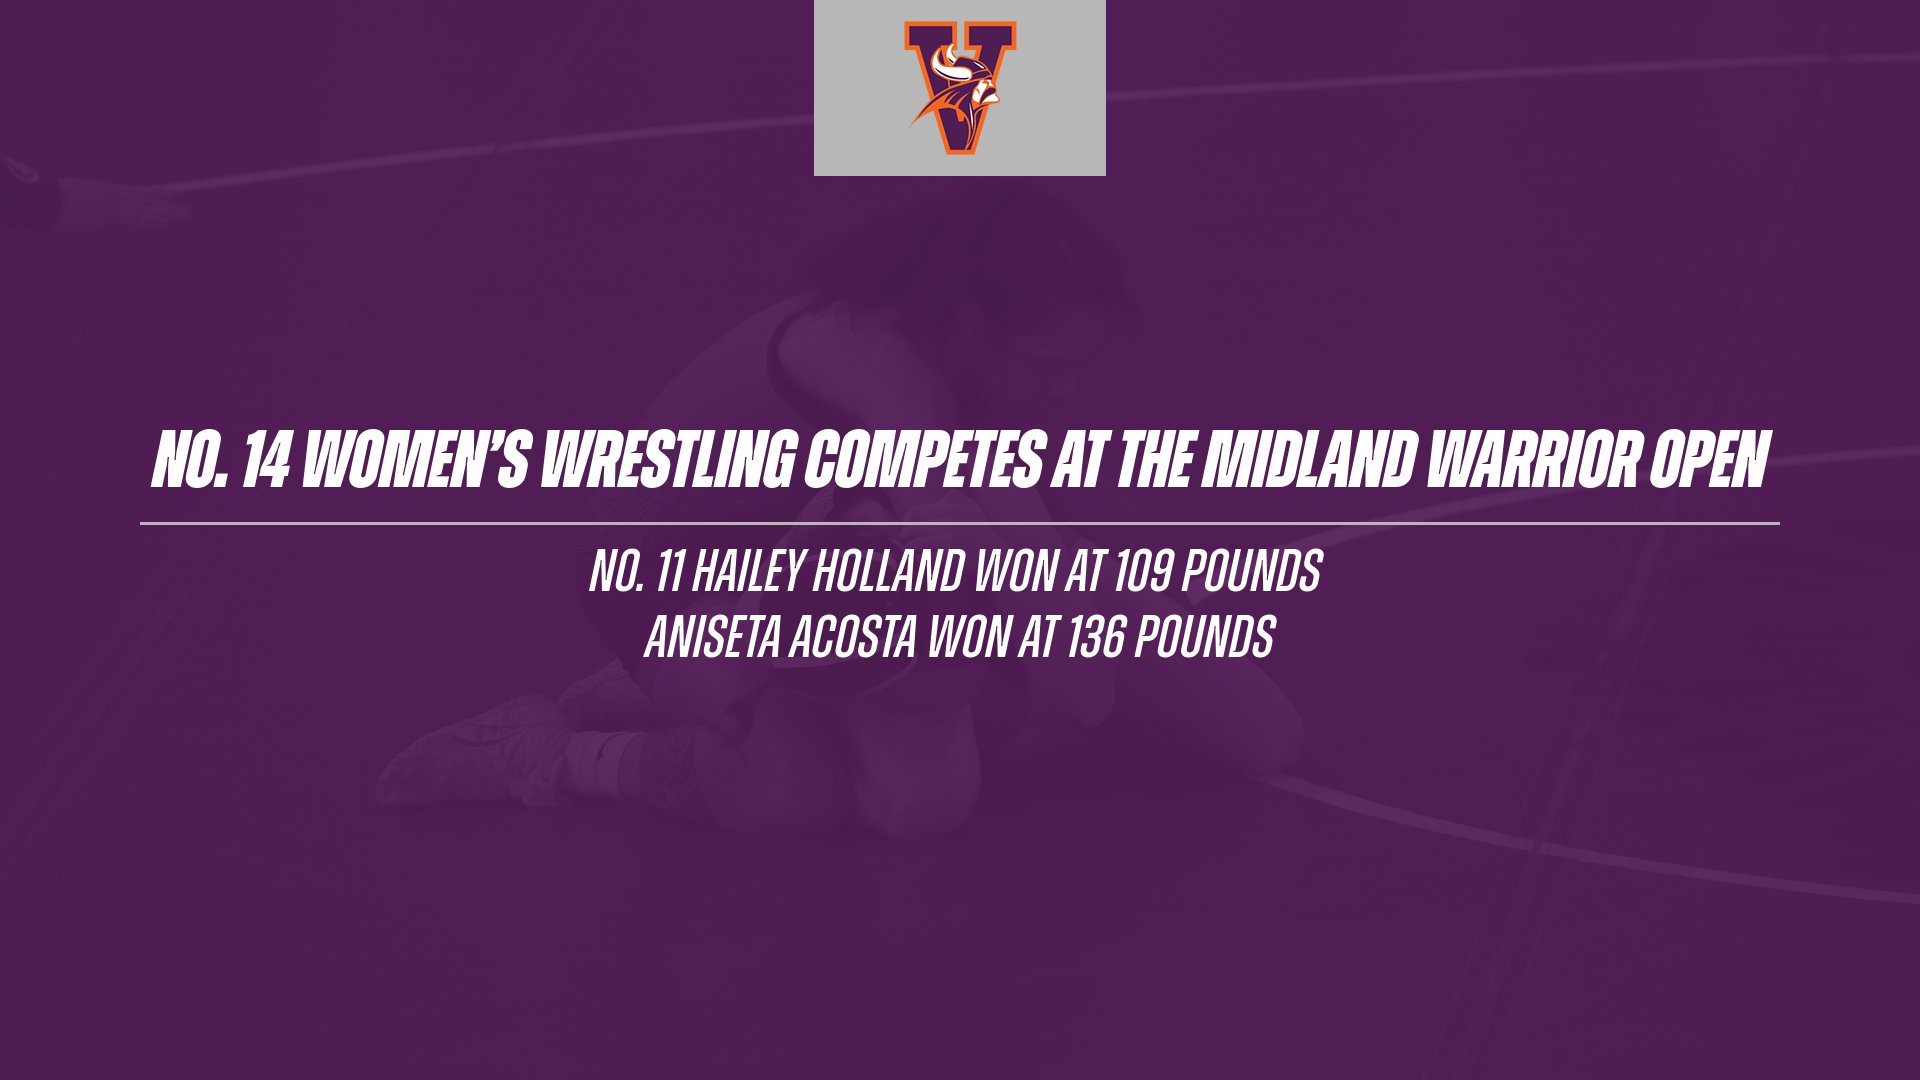 No. 14 Women's Wrestling Competes at the Midland Warrior Open